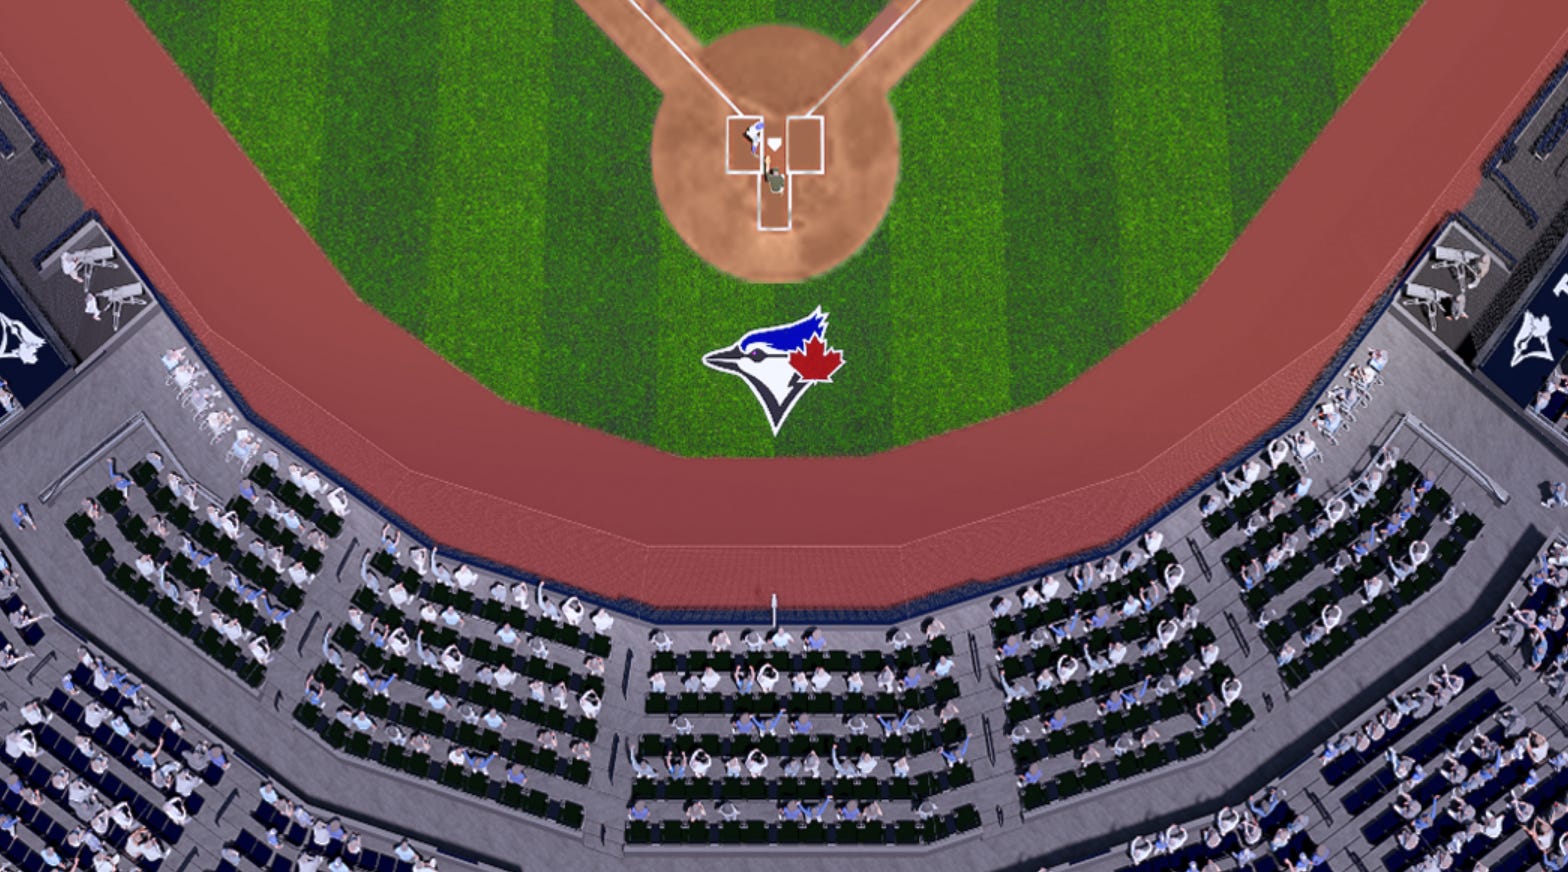 Blue Jays to reduce foul territory on field as part of 100 level renovations